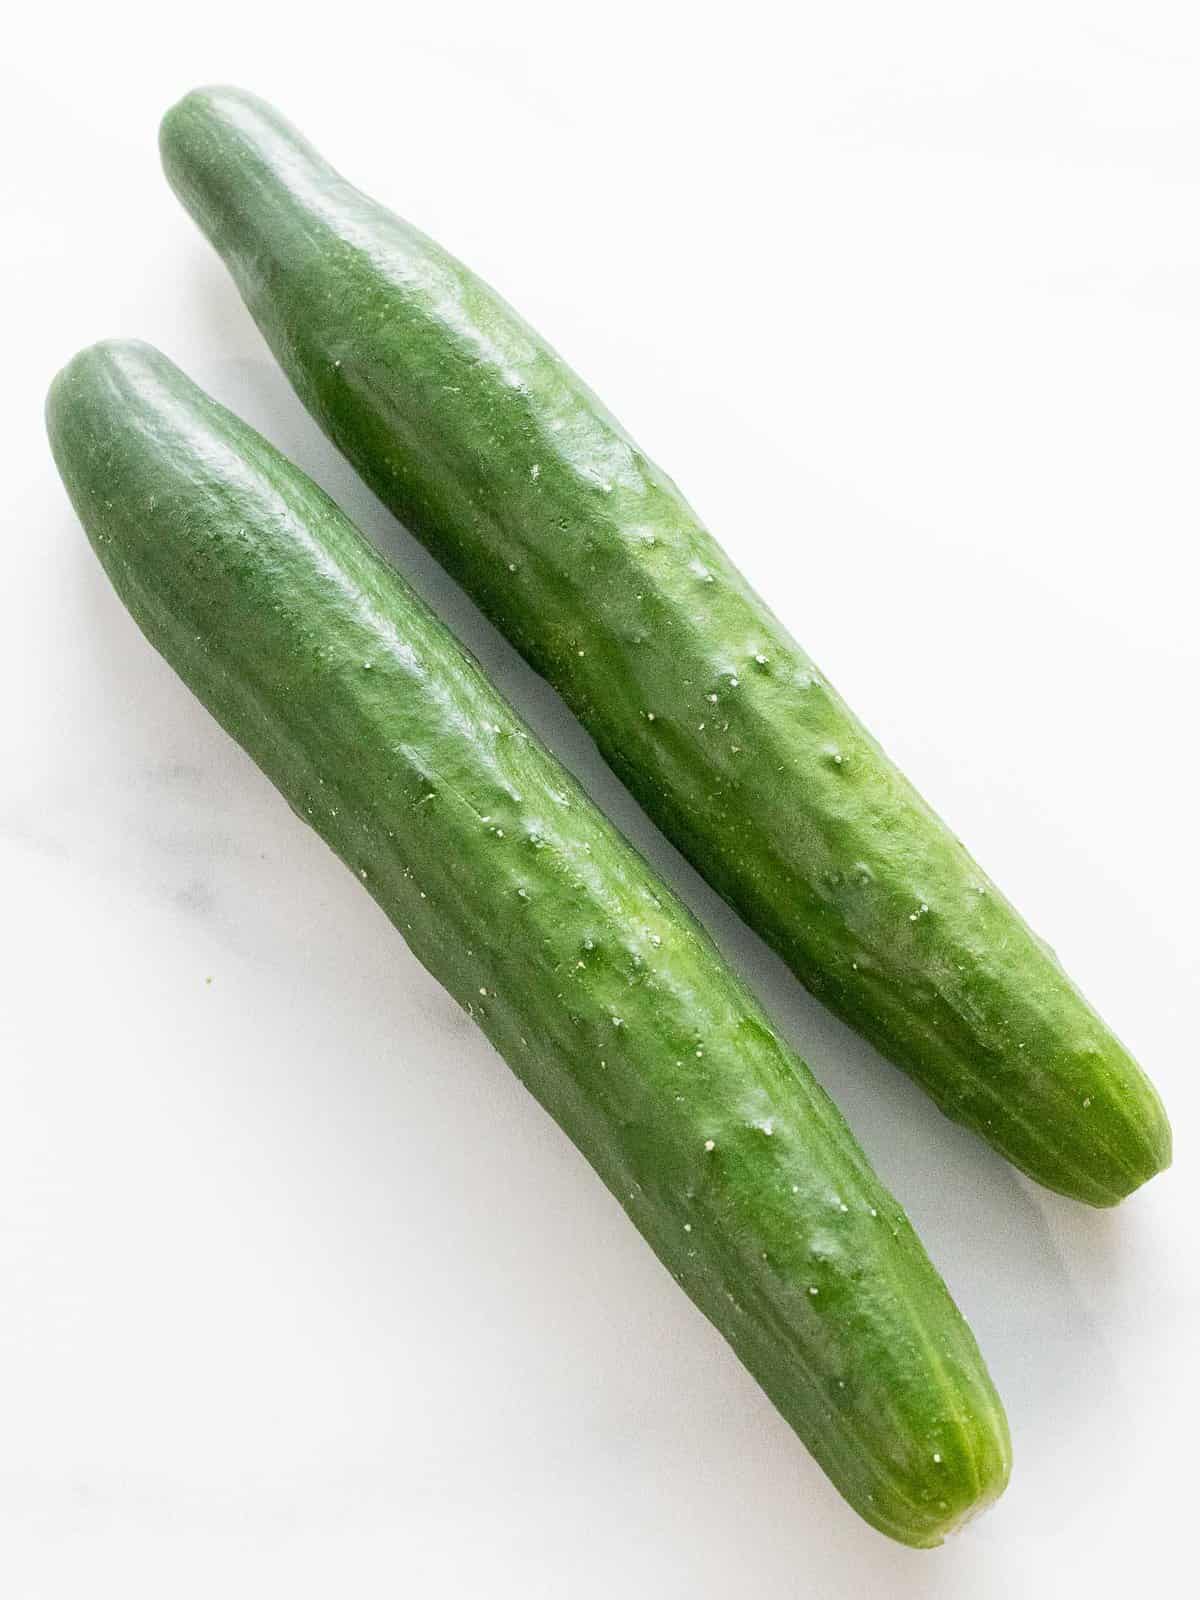 Two Japanese cucumbers.